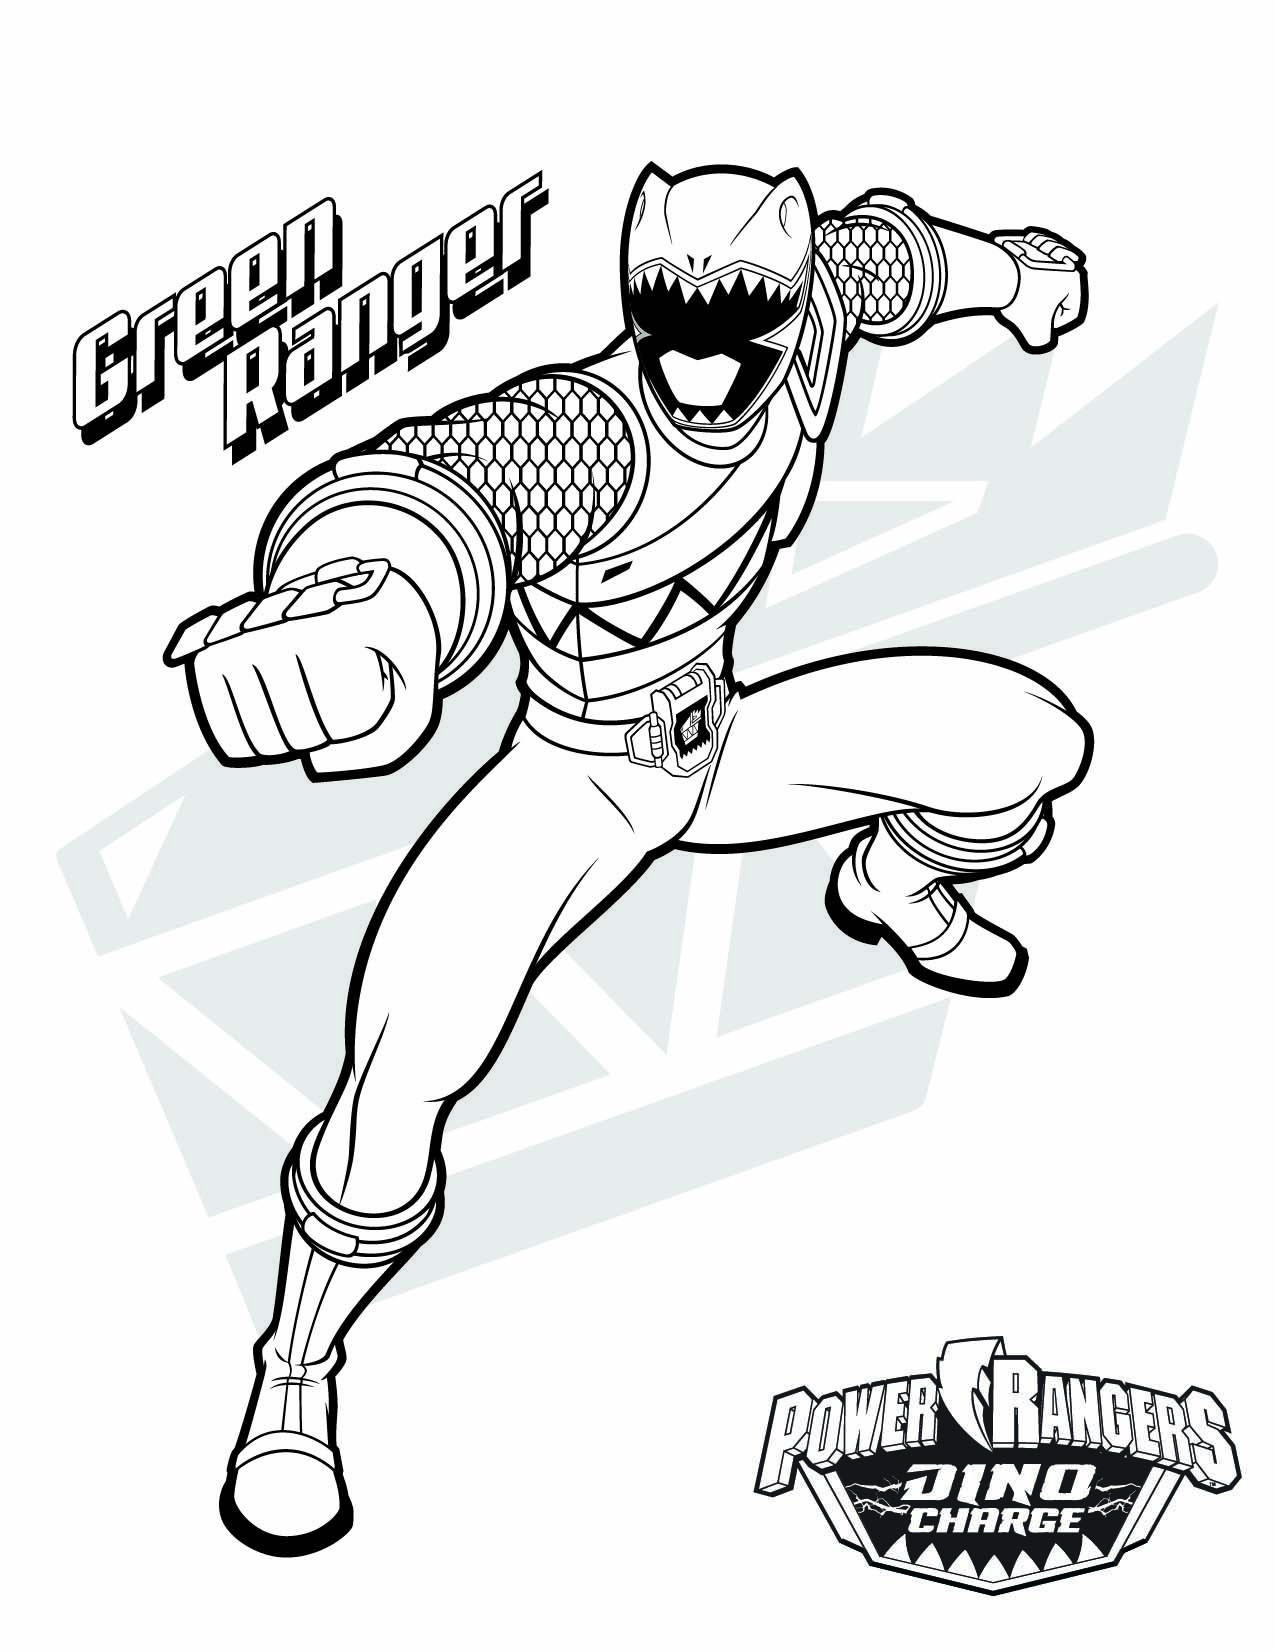 Green Ranger Coloring Page - Free Printable Coloring Pages for Kids